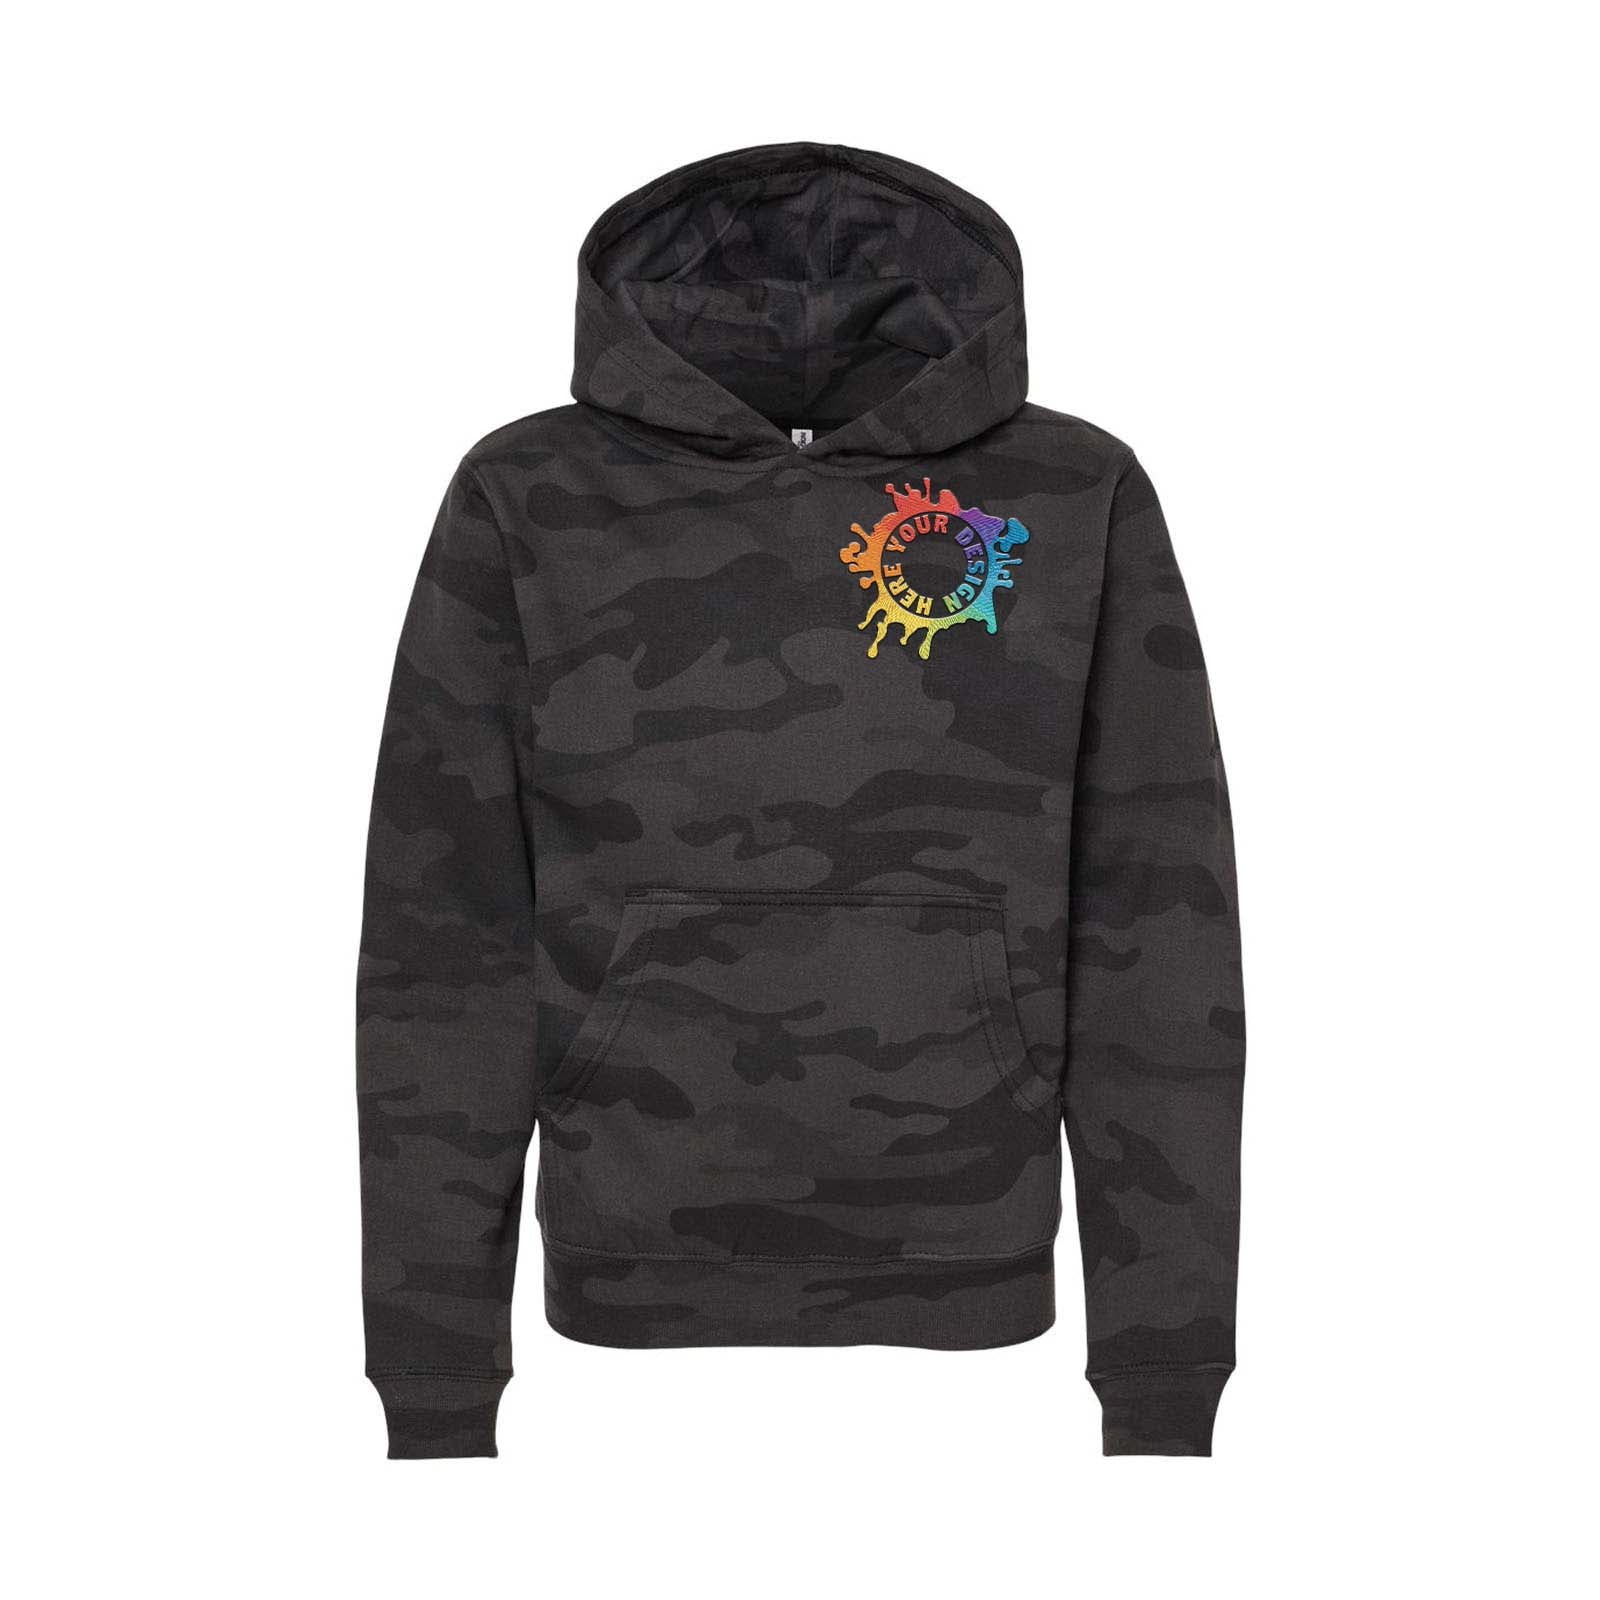 Independent Trading Co. Youth Midweight Hooded Sweatshirt Embroidery - Mato & Hash